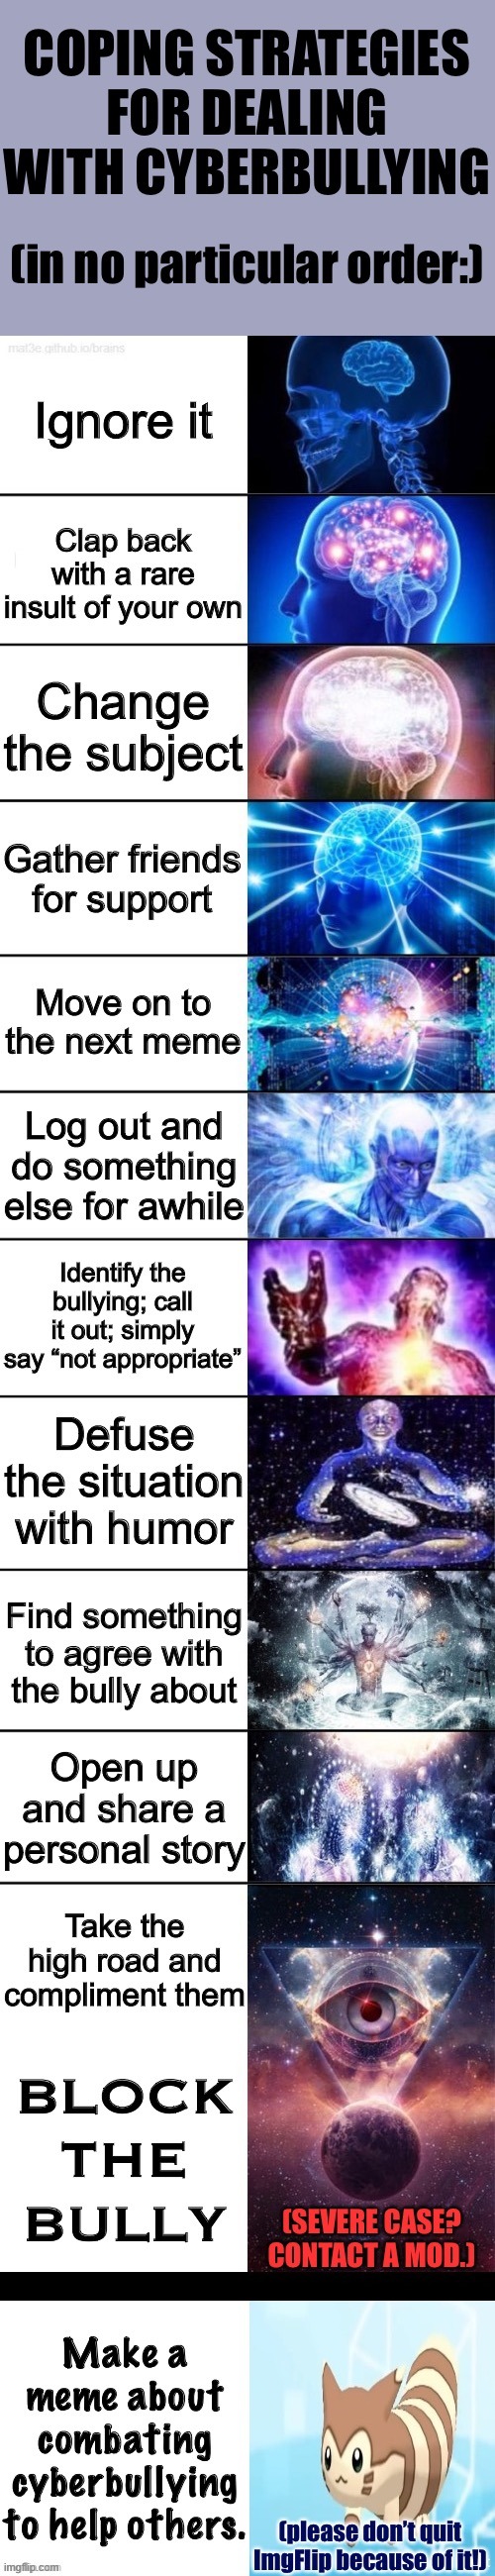 Strategies for combating cyberbullying. For anyone who thinks I've never done anything to fight it on this site. | image tagged in coping strategies for dealing with cyberbullying,cyberbullying,harassment,terms and conditions,expanding brain | made w/ Imgflip meme maker